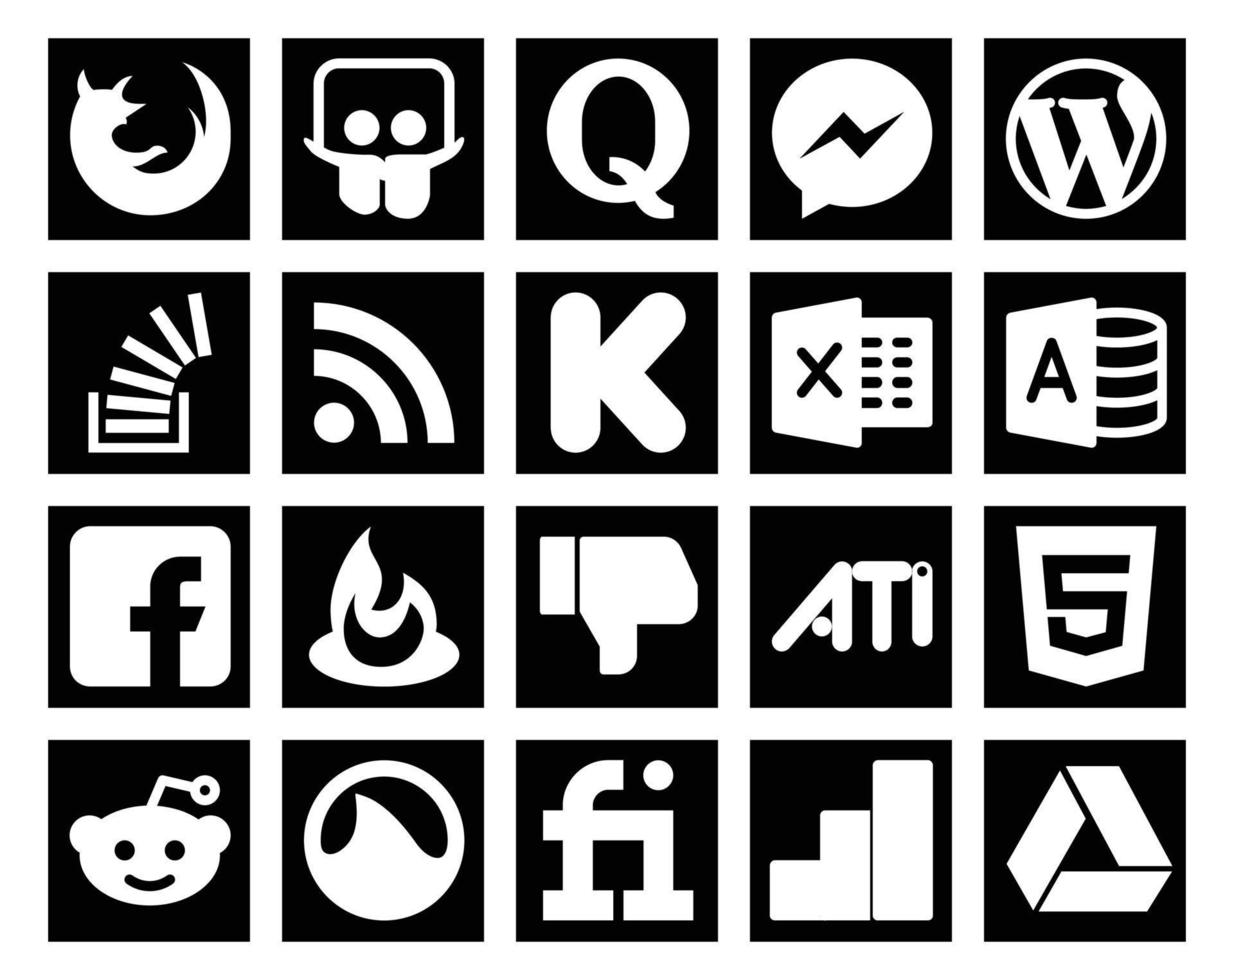 20 Social Media Icon Pack Including feedburner microsoft access stockoverflow excel rss vector